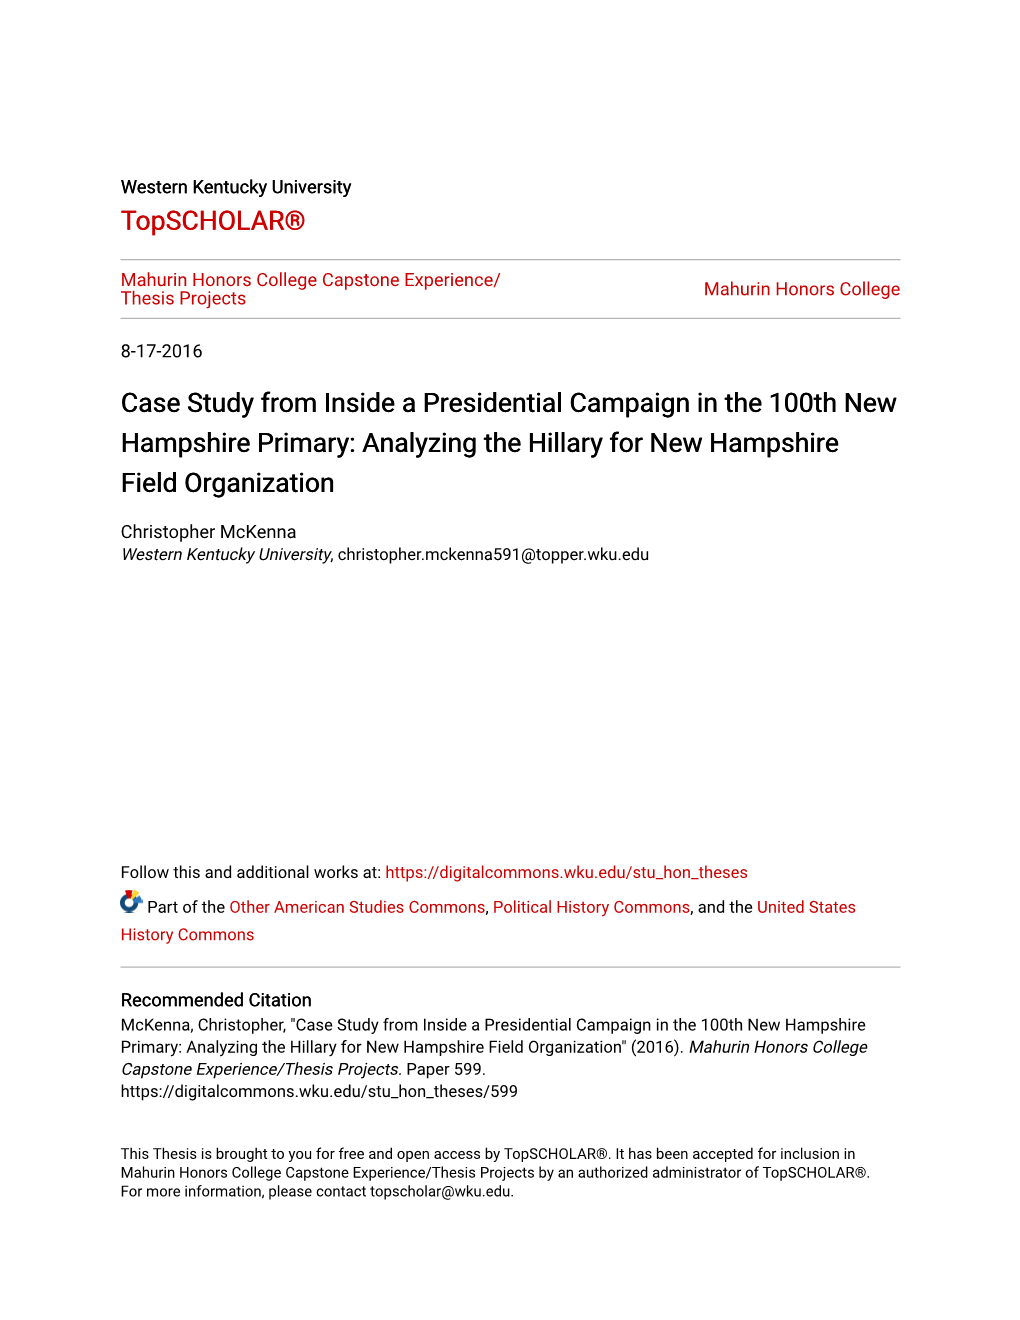 Case Study from Inside a Presidential Campaign in the 100Th New Hampshire Primary: Analyzing the Hillary for New Hampshire Field Organization